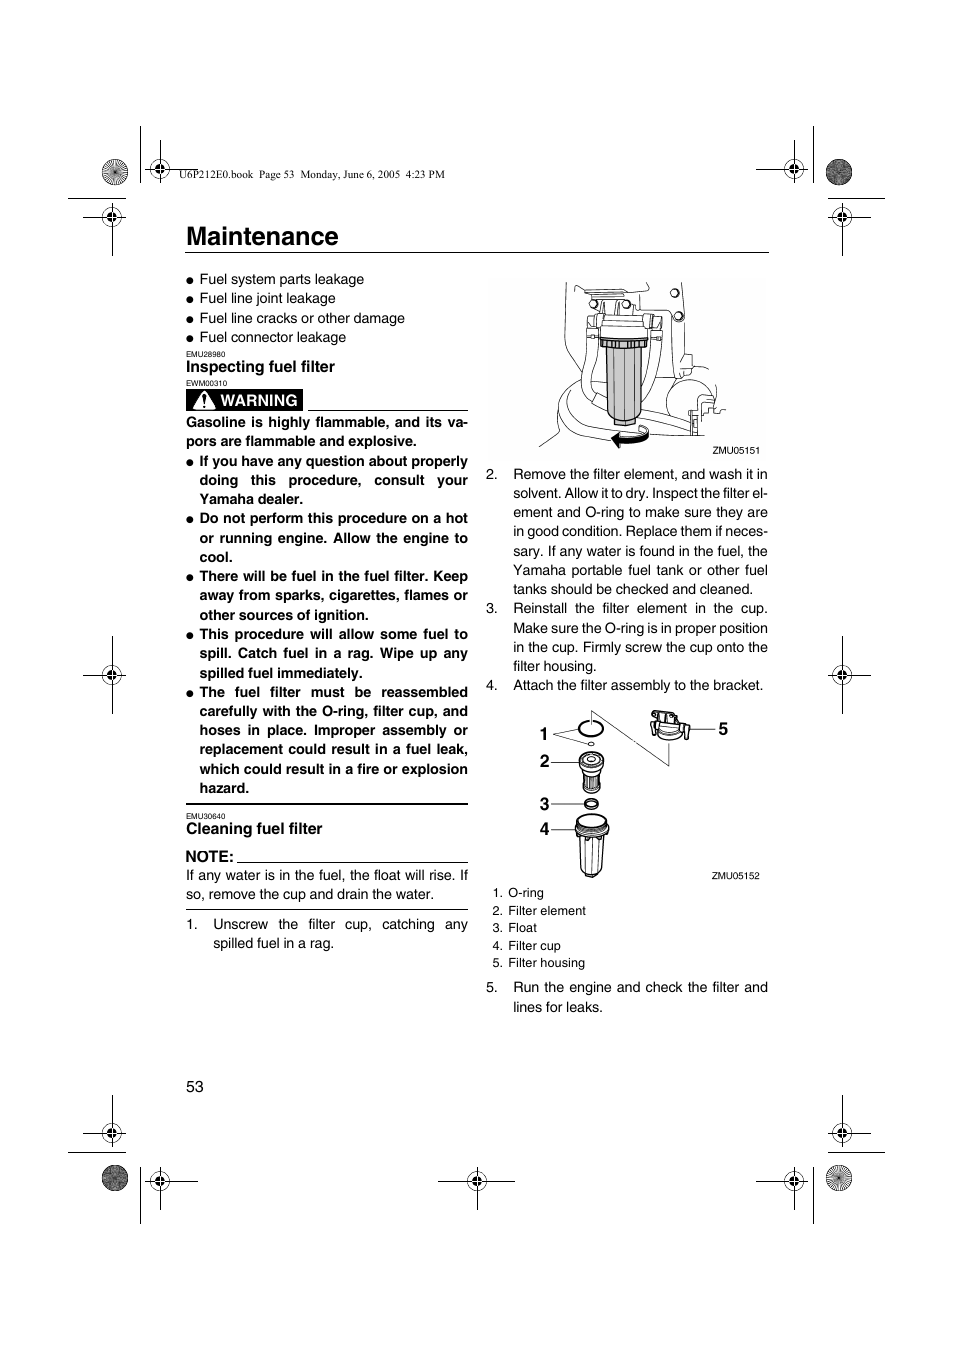 Inspecting fuel filter cleaning fuel filter, Maintenance | Yamaha F250 LF250 User Manual | Page 59 / 83